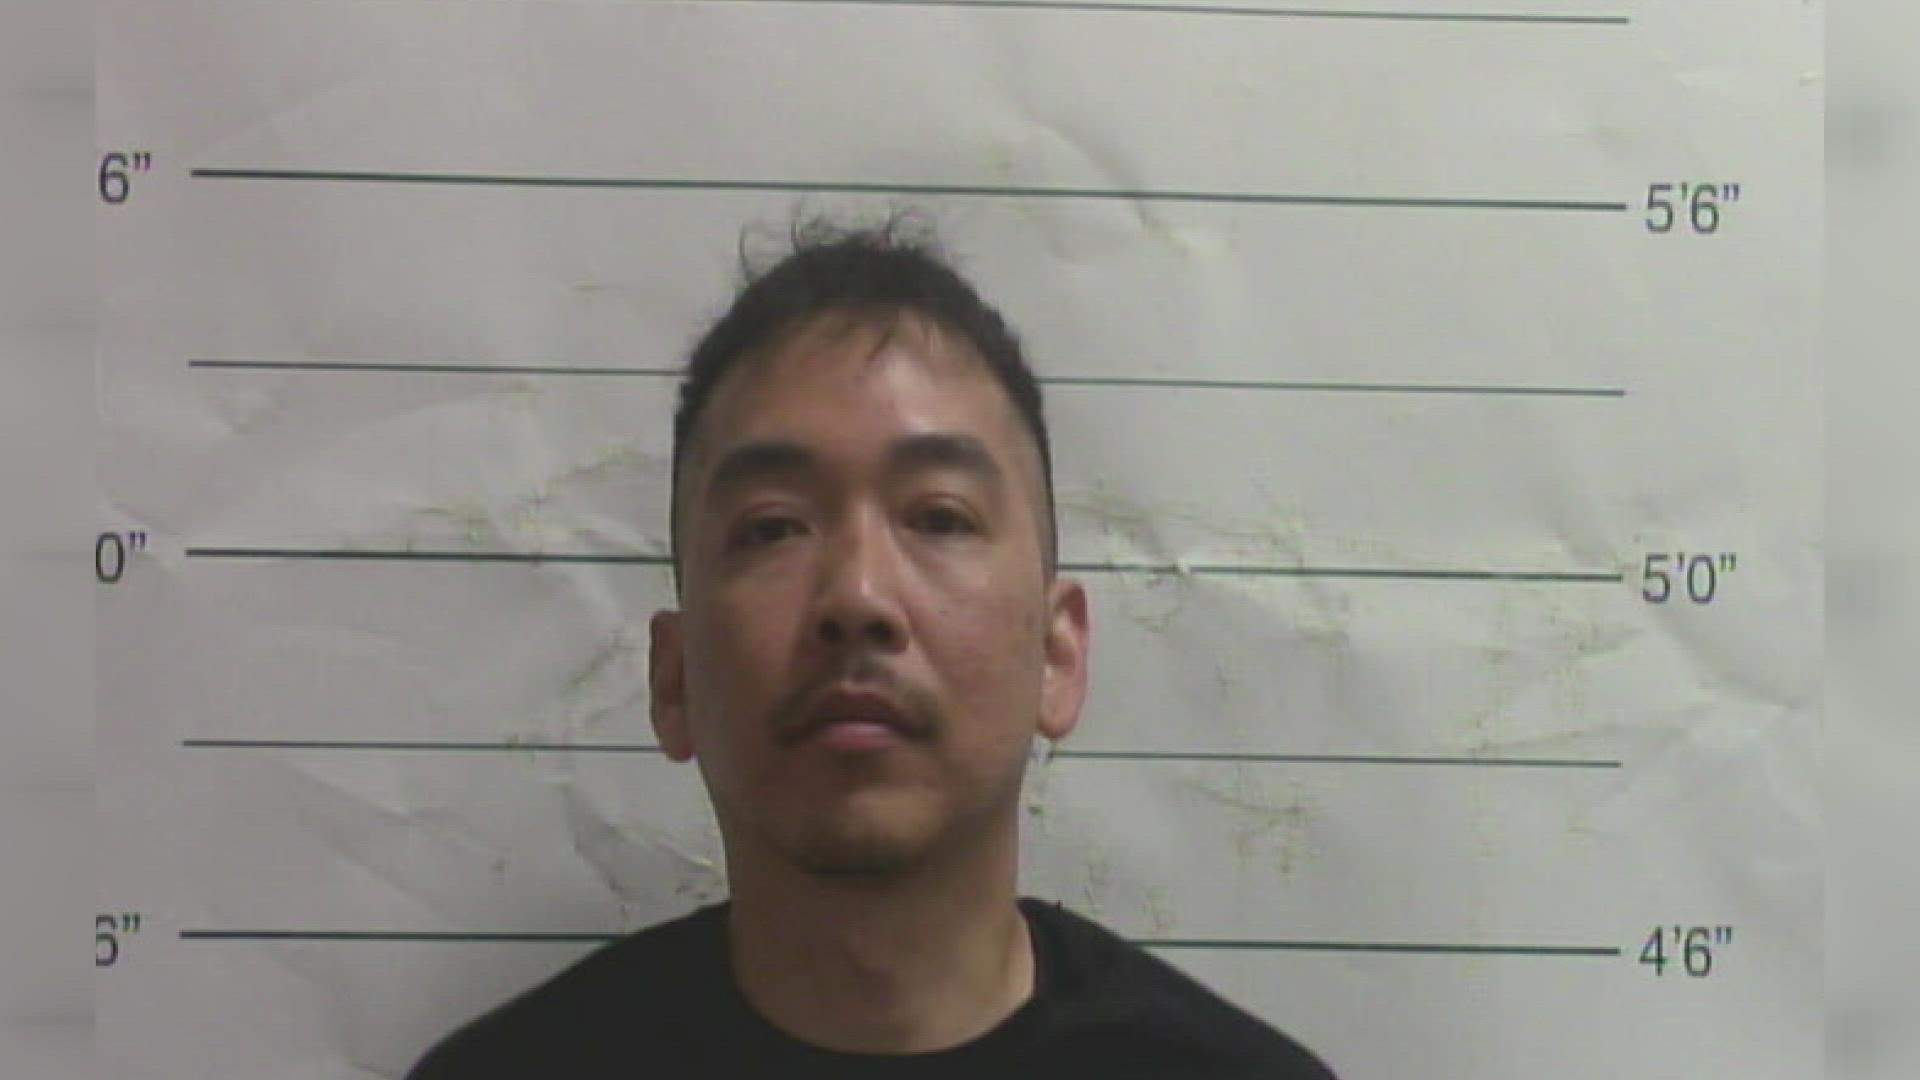 37-year-old Tommy Nguyen has been charged with manslaughter in connection with the incident.